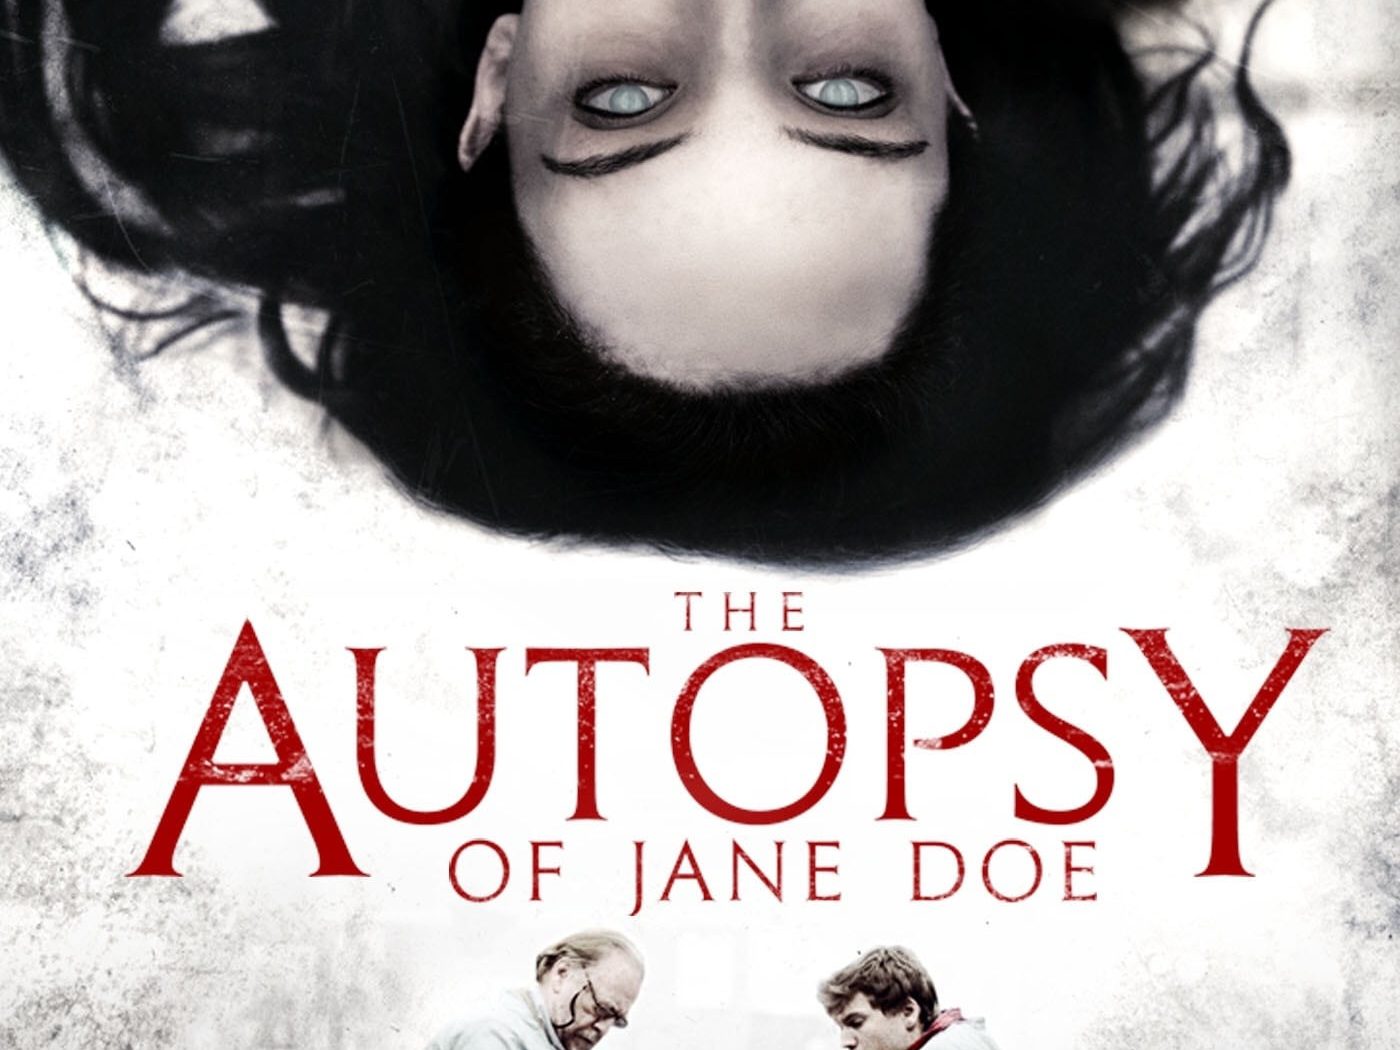 Poster for the movie "The Autopsy of Jane Doe"